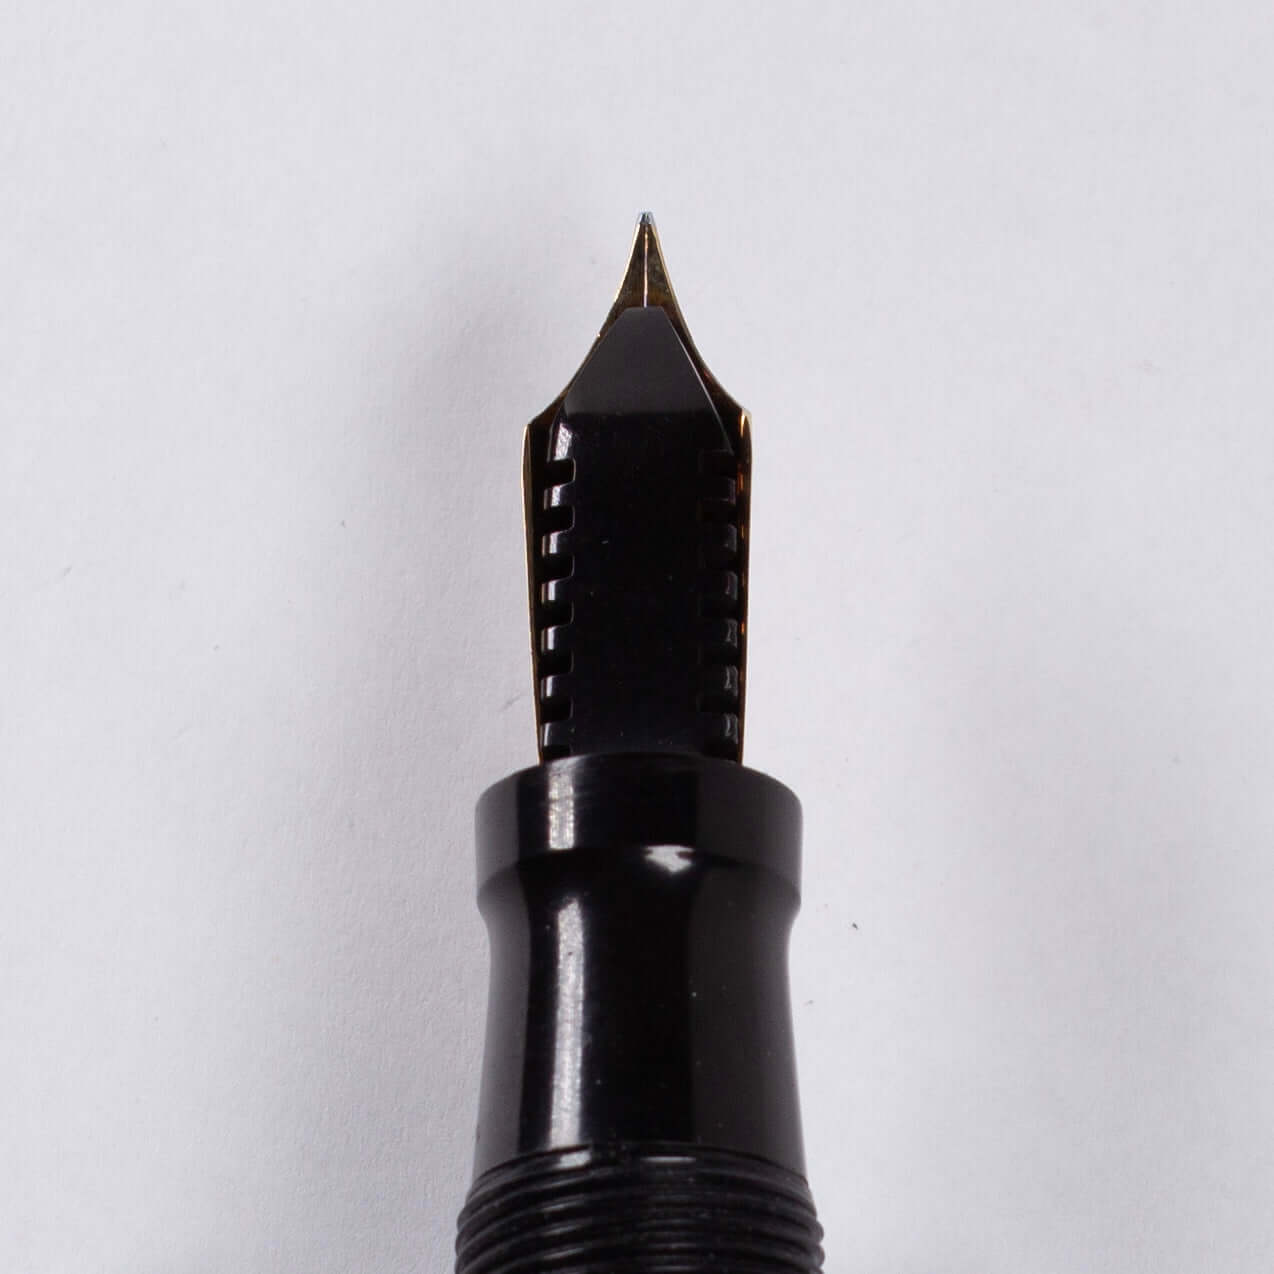 ${titleType: Vintage lever fill fountain pen Product Name: Sheaffer Oversize Lifetime Balance Manufacturer and Year: 1930's Length: 5 5/8 Filling System: Lever fill Color/Pattern: Black Nib Type/Condition and remarks: 14K Lifetime fine point Condition: Ex